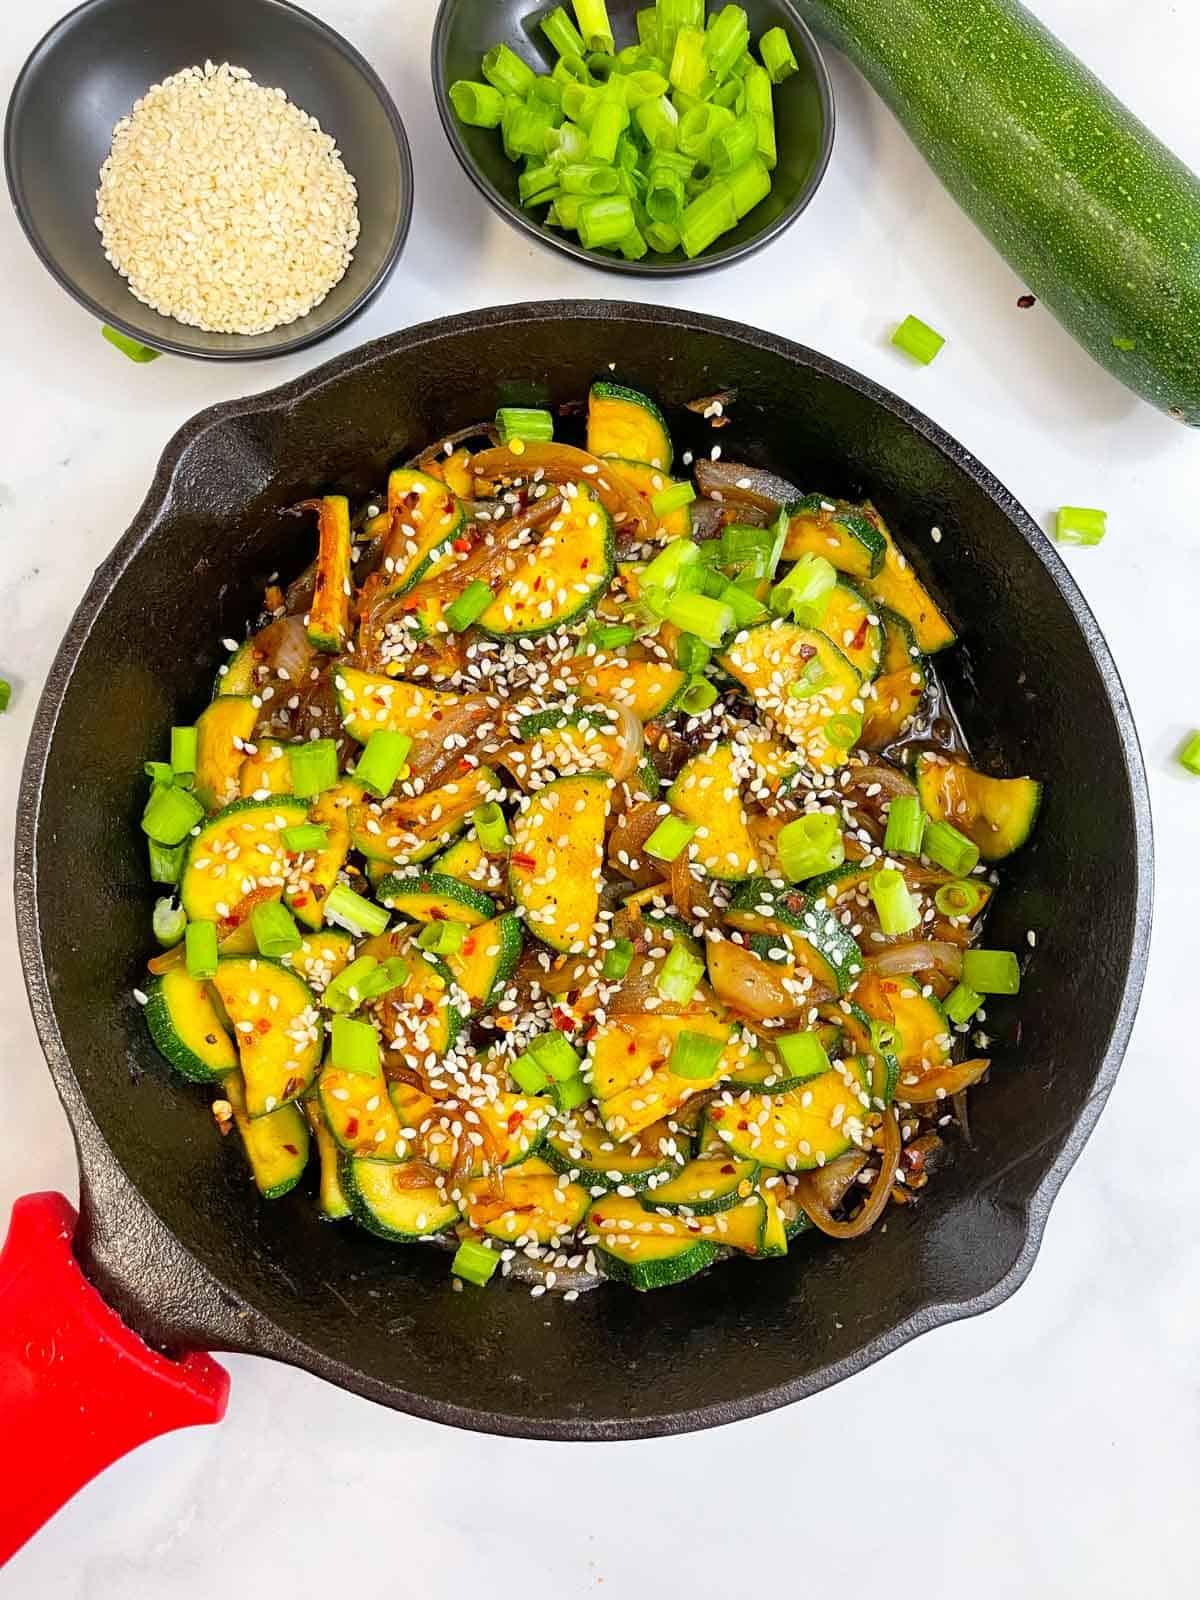 zucchini stir fry served on a skillet garnished with green onions and toasted sesame seeds